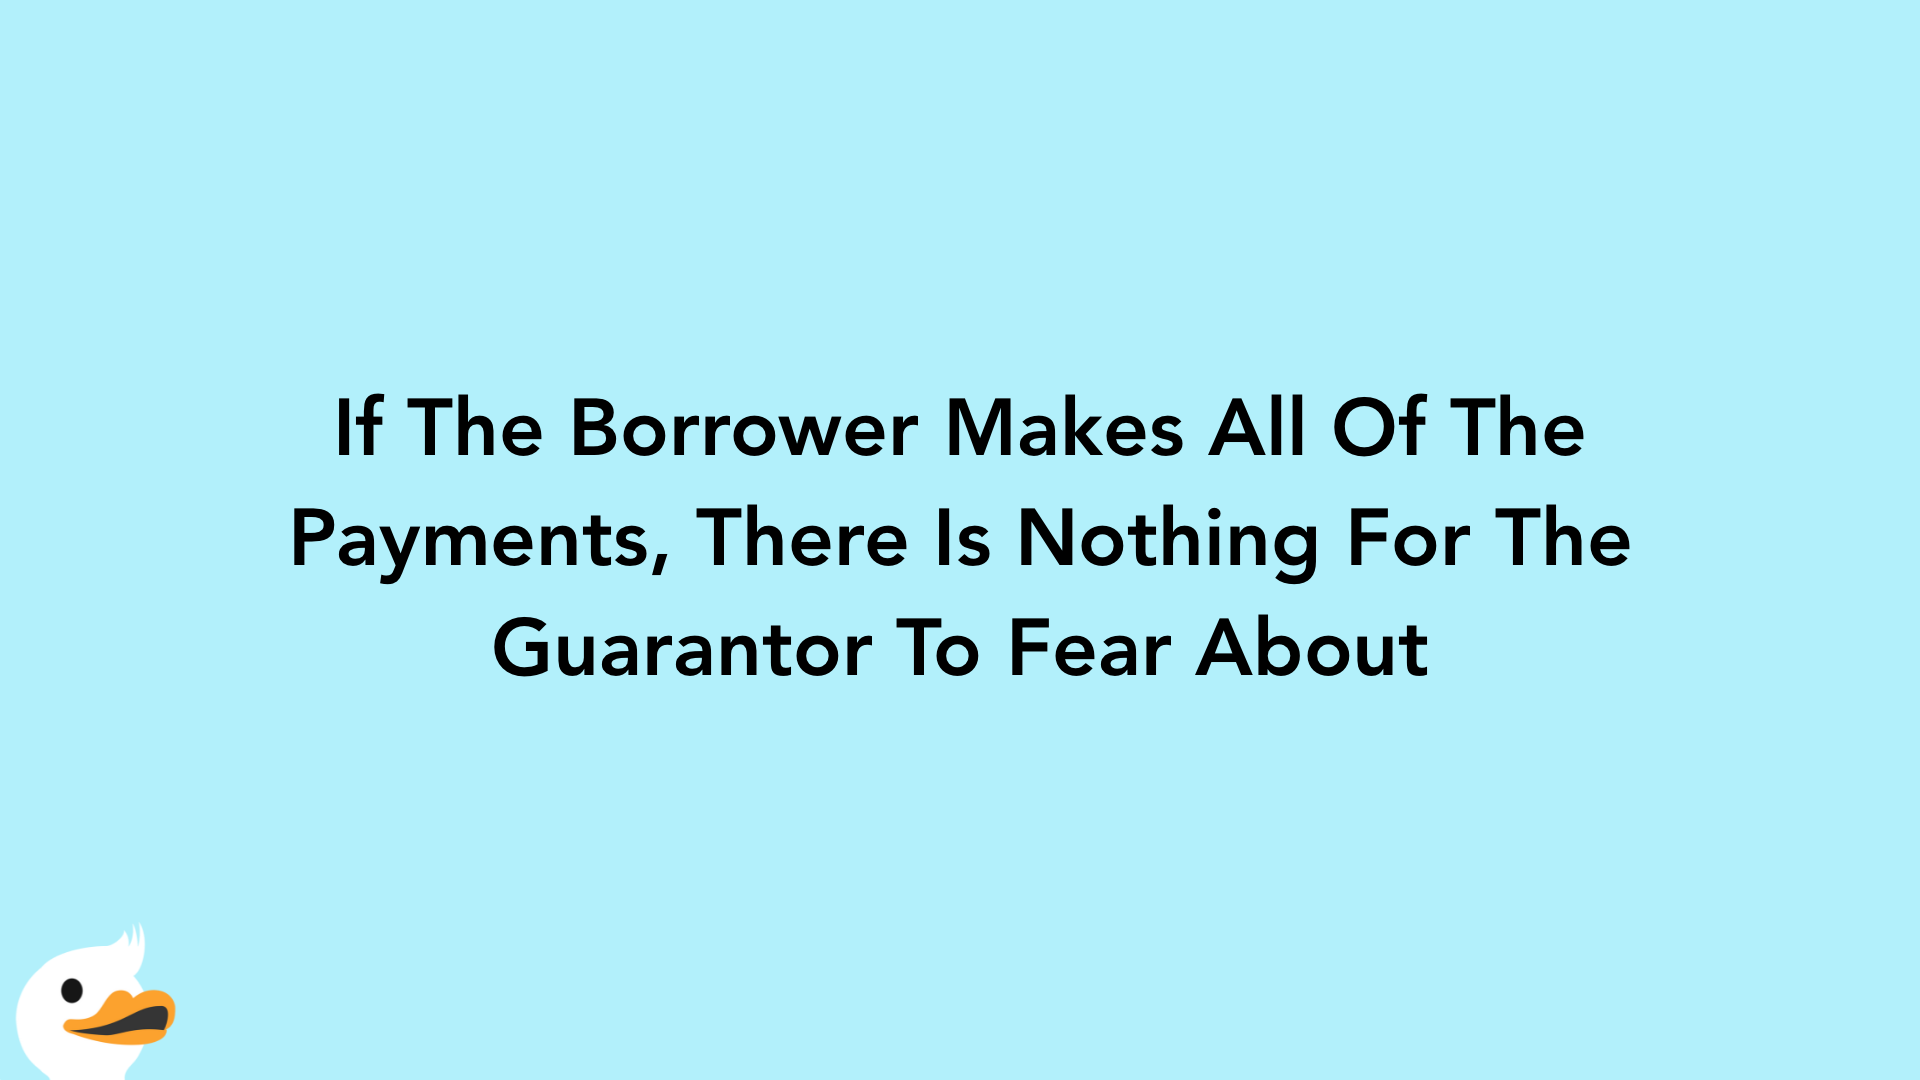 If The Borrower Makes All Of The Payments, There Is Nothing For The Guarantor To Fear About